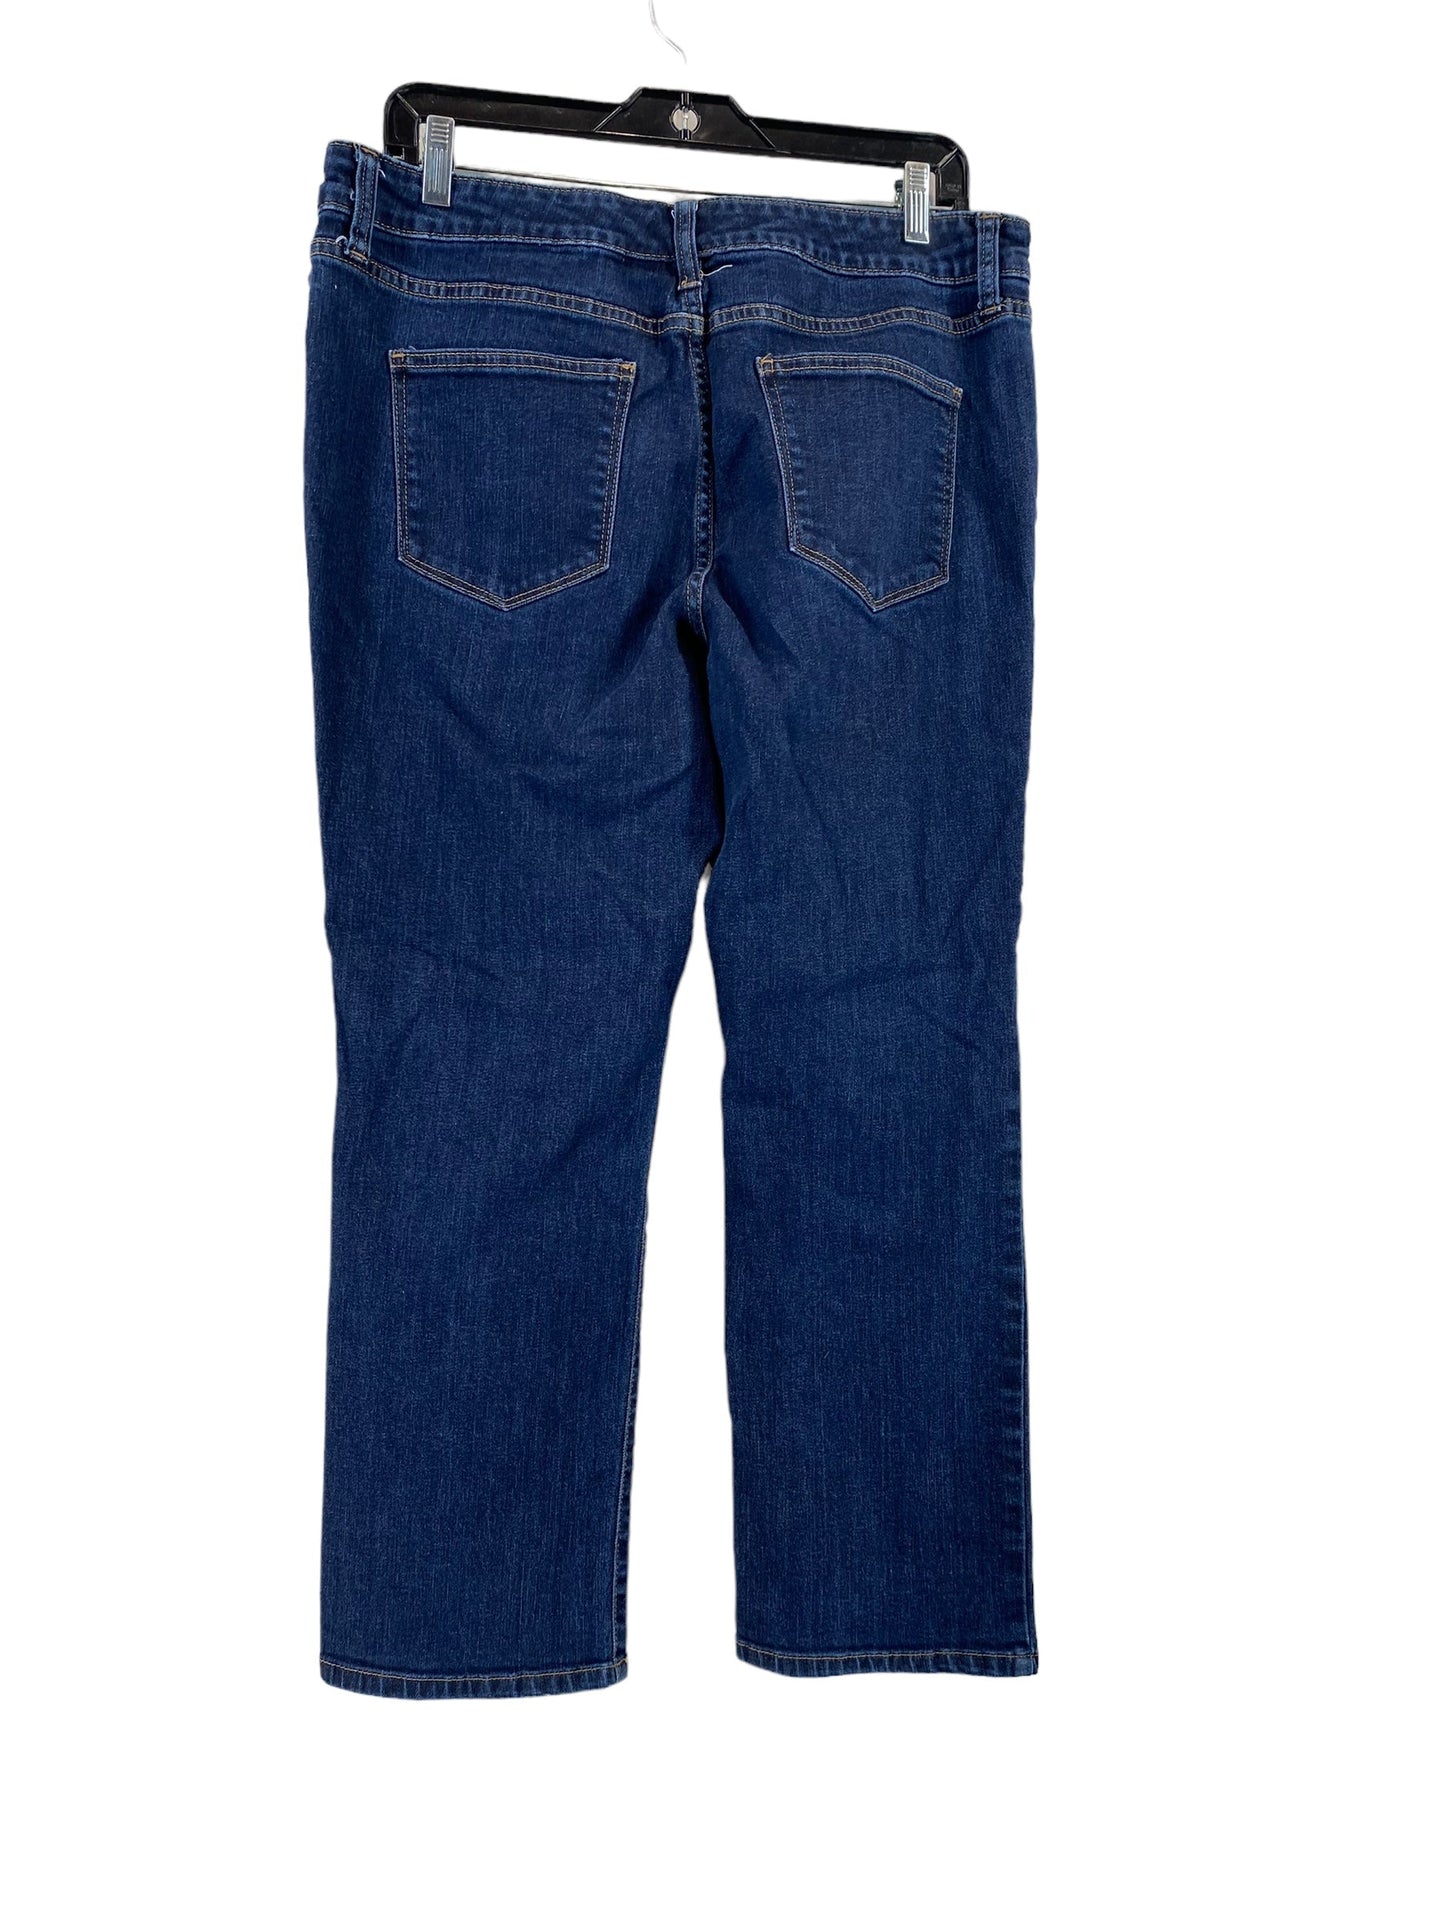 Jeans Straight By St Johns Bay  Size: 14petite